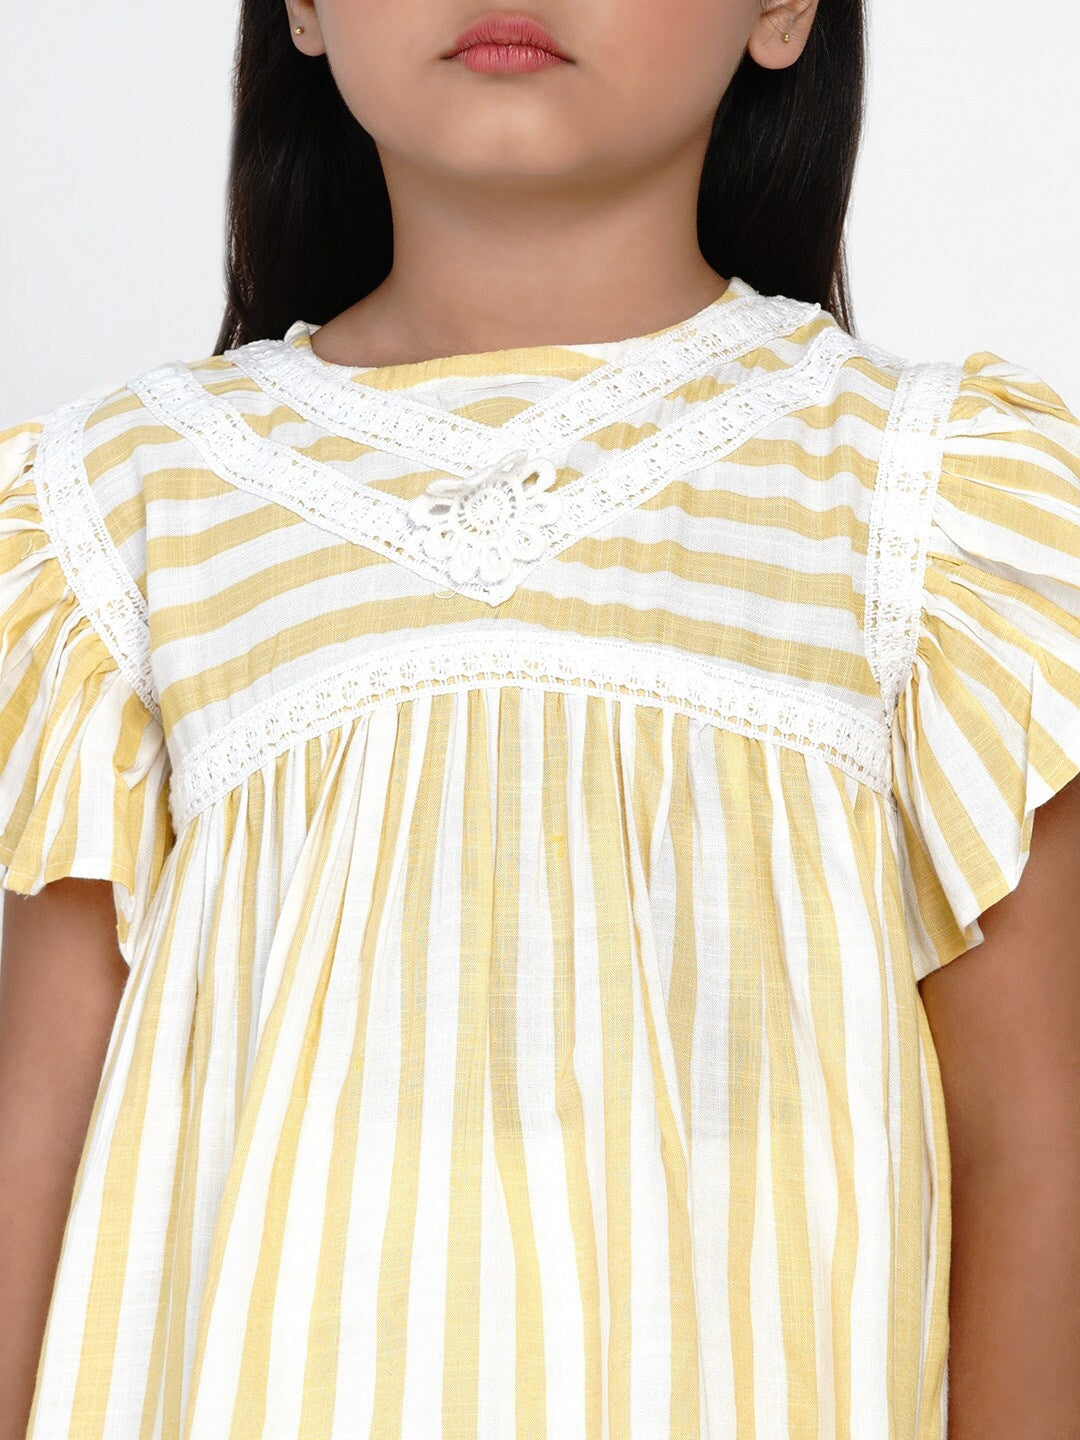 Girls Yellow & Off-White Striped Top with CaprisWomensFashionFun.com